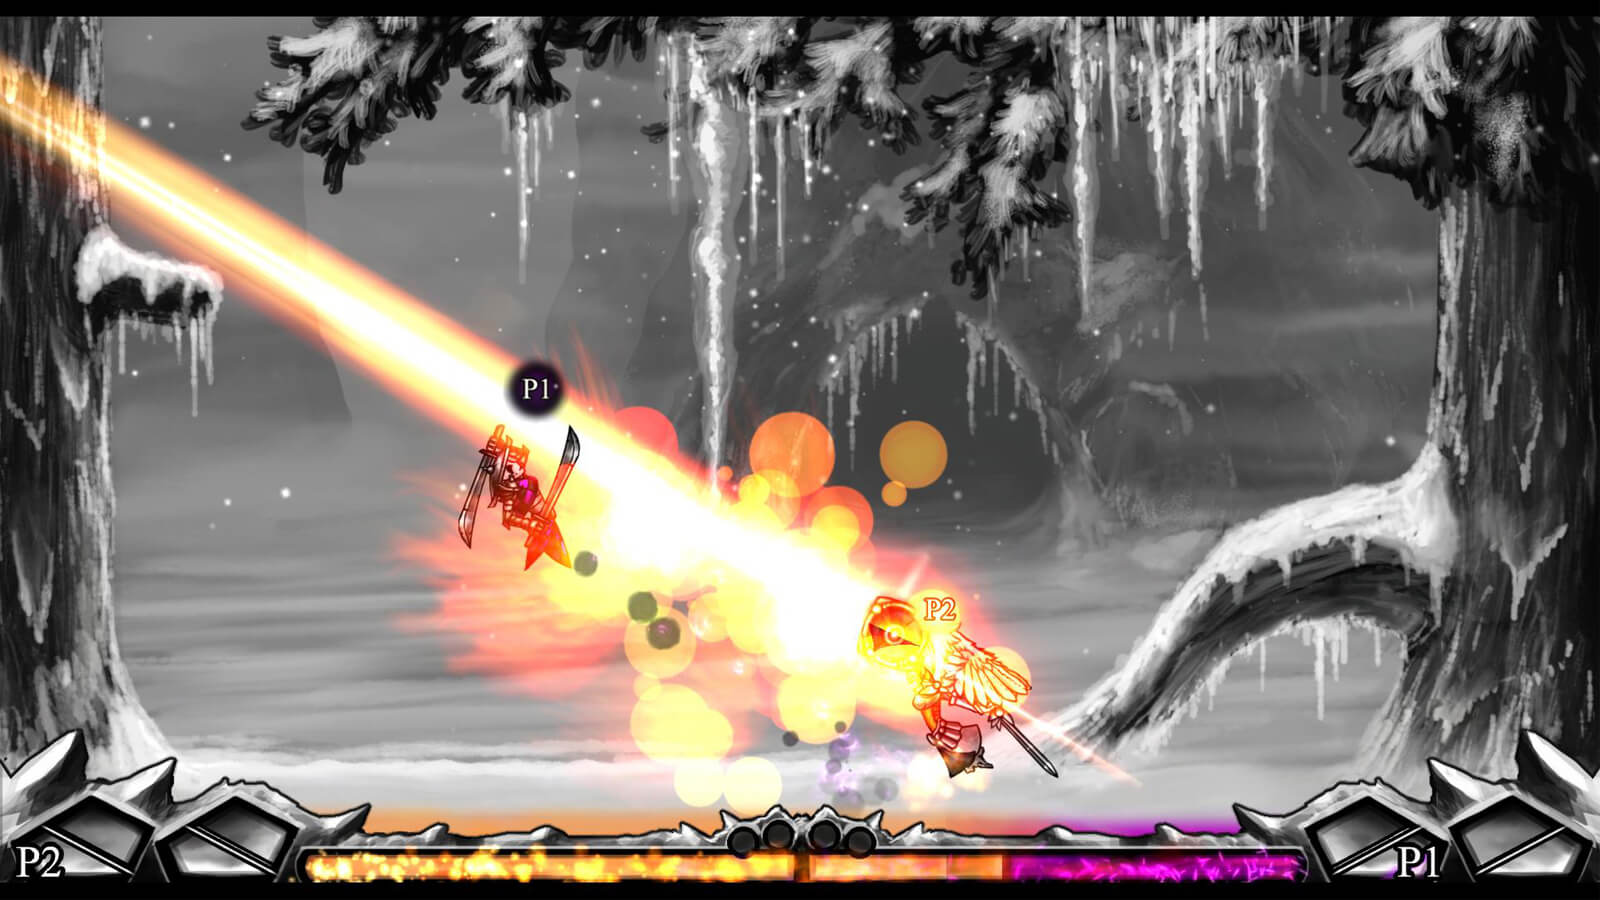 A winged character blasts their opponent with an orange beam of light.